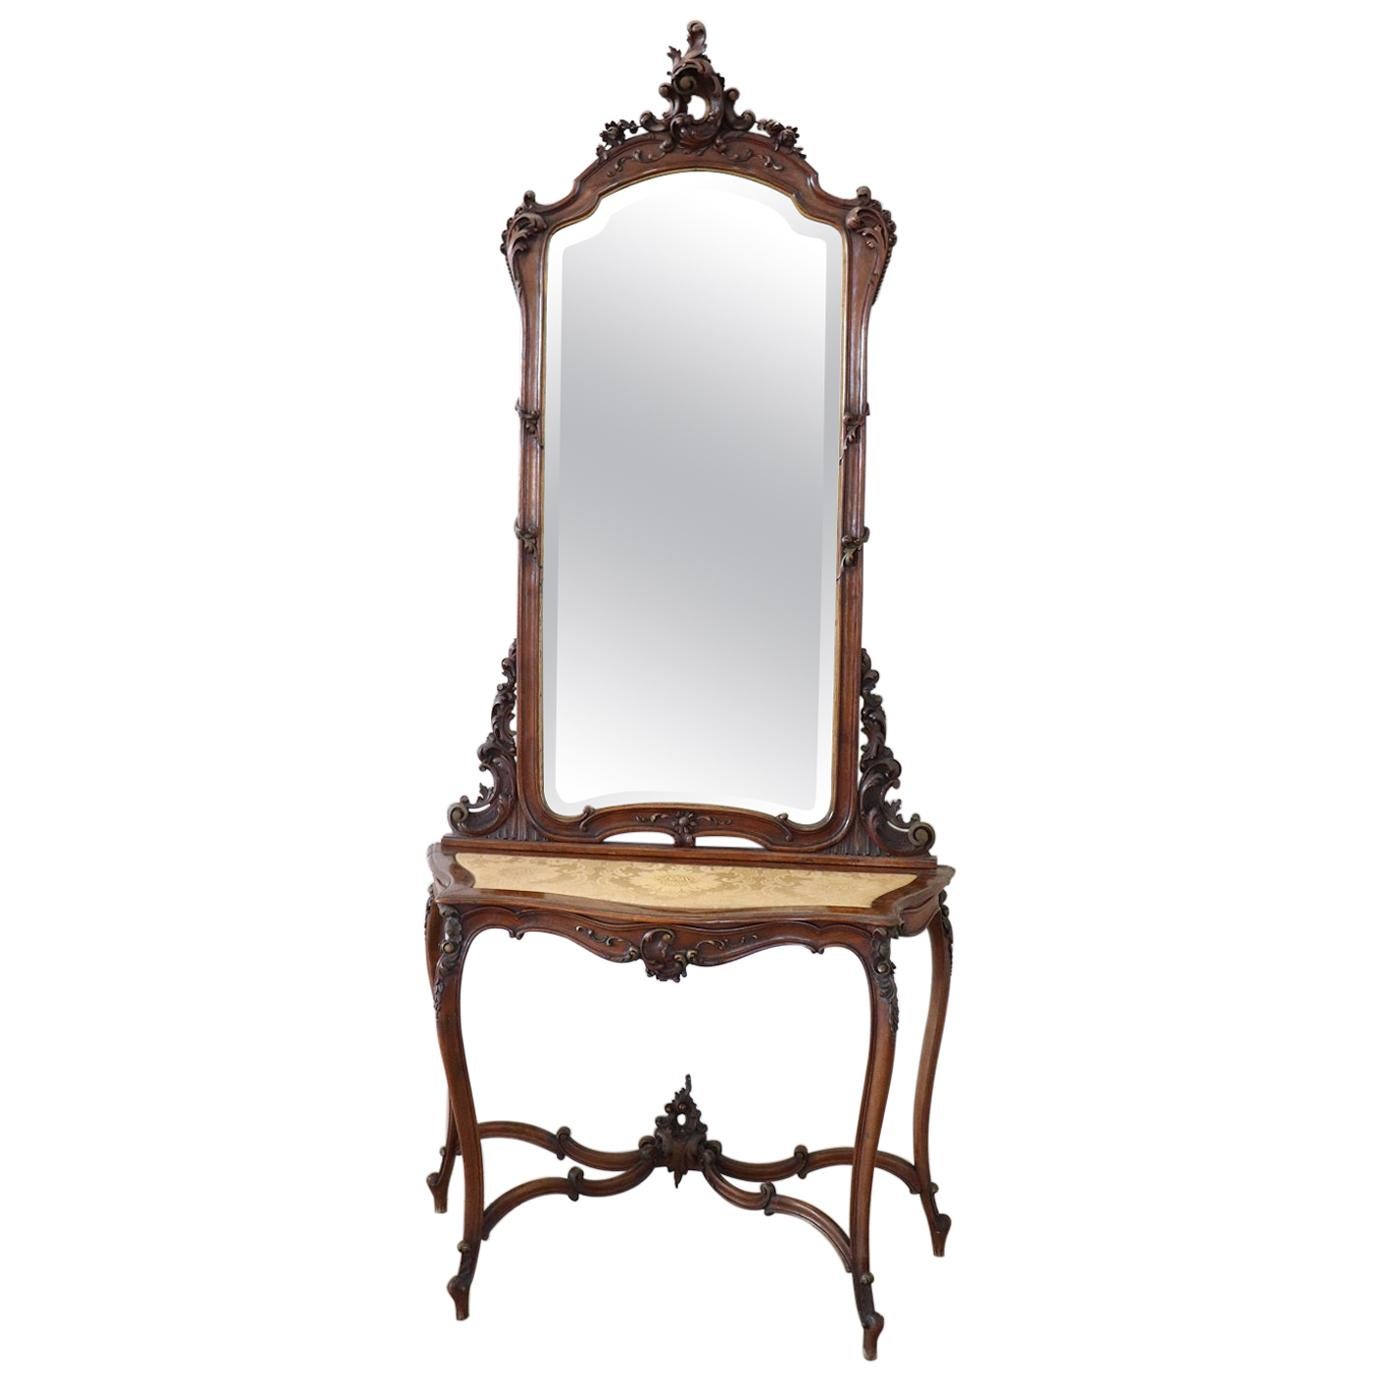 19th Century Italian Carved Walnut Antique Console Table with Mirror